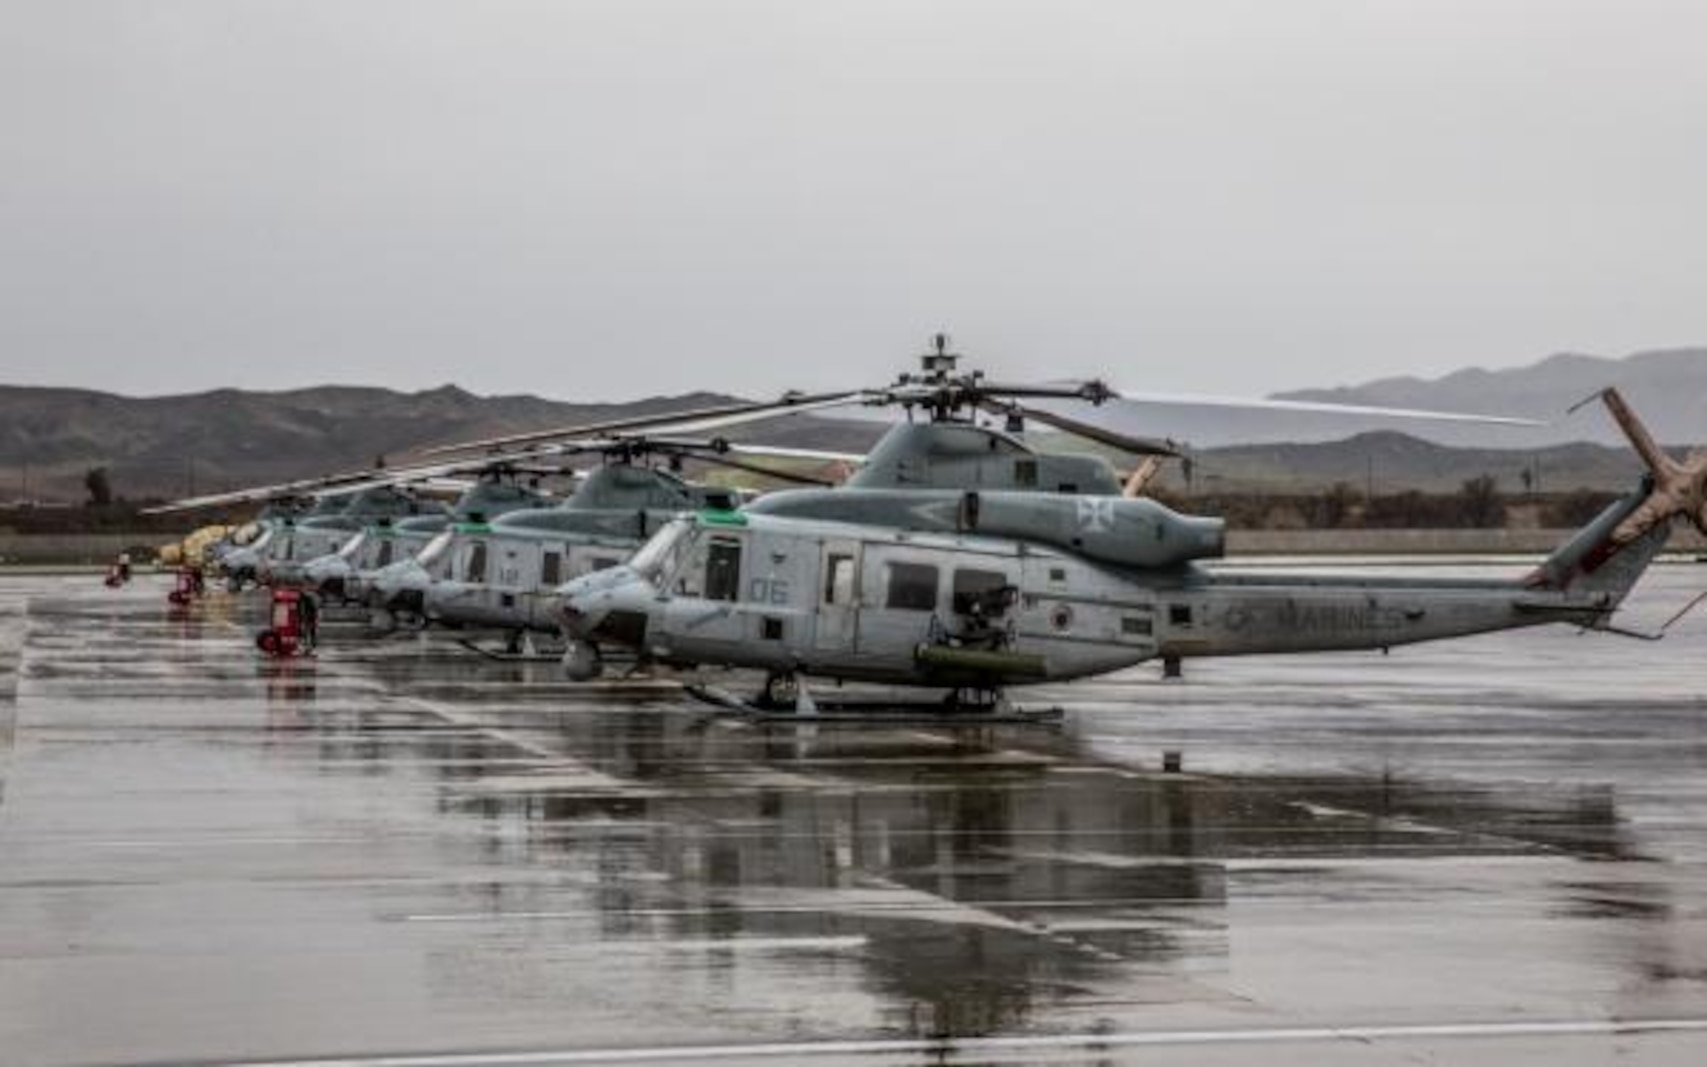 UH-1Y Venom helicopters sit in the rain